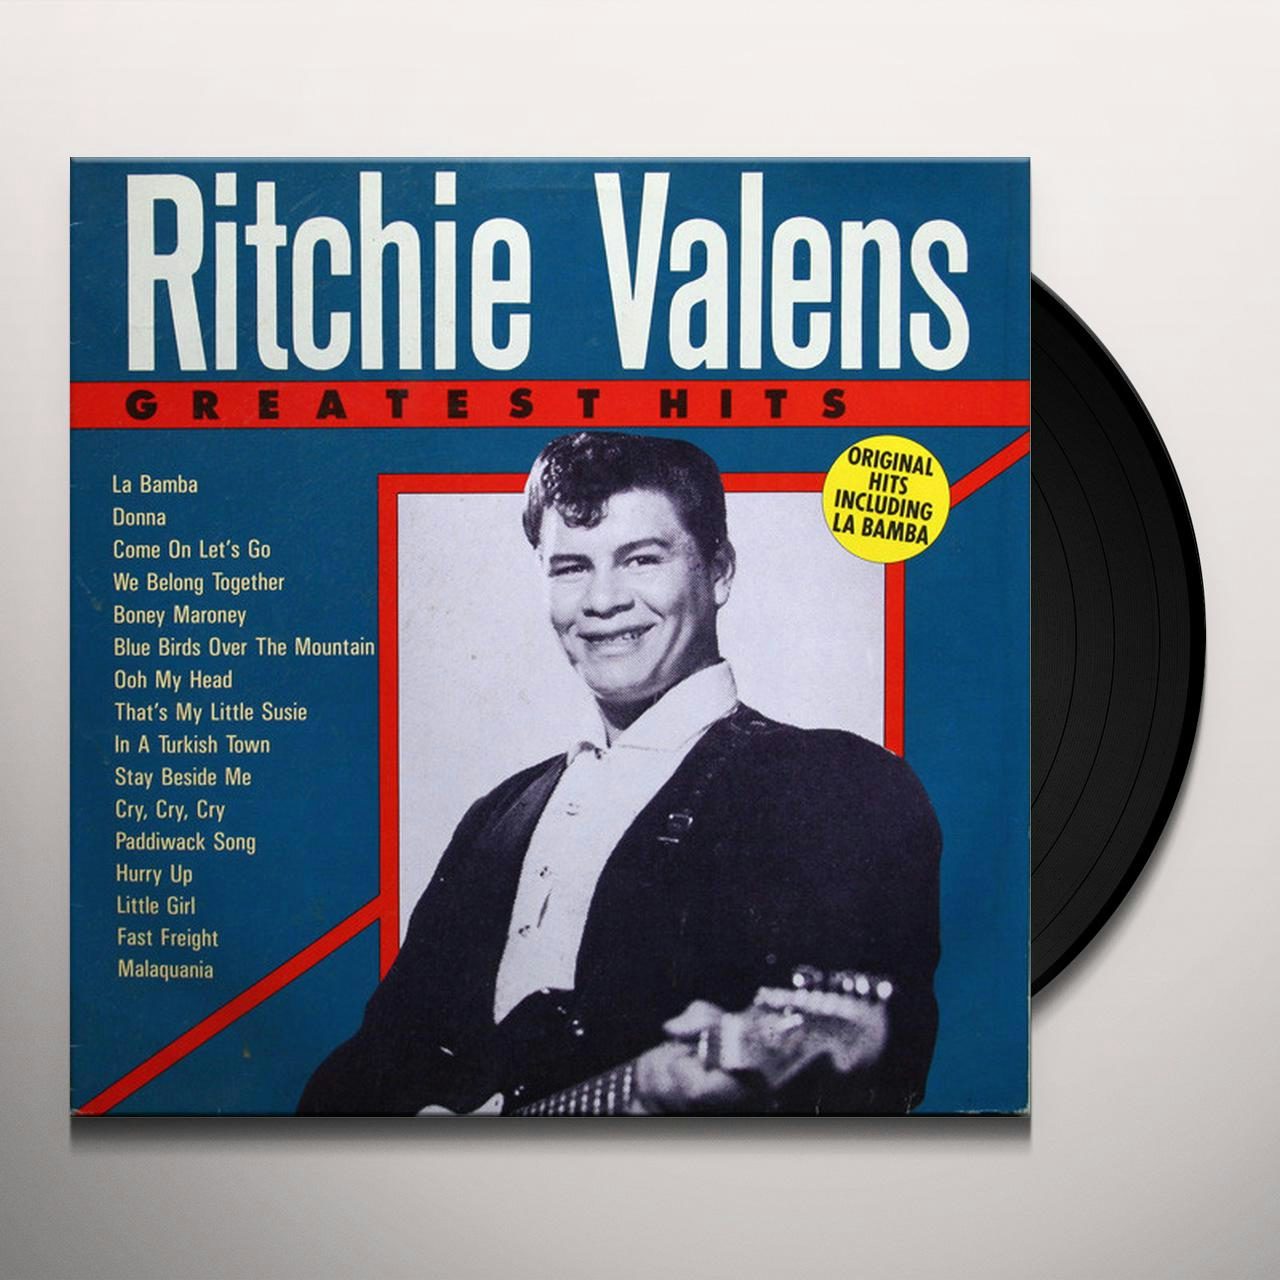 Ritchie Valens: The Hits Vinyl Record - Limited Edition, 180 Gram